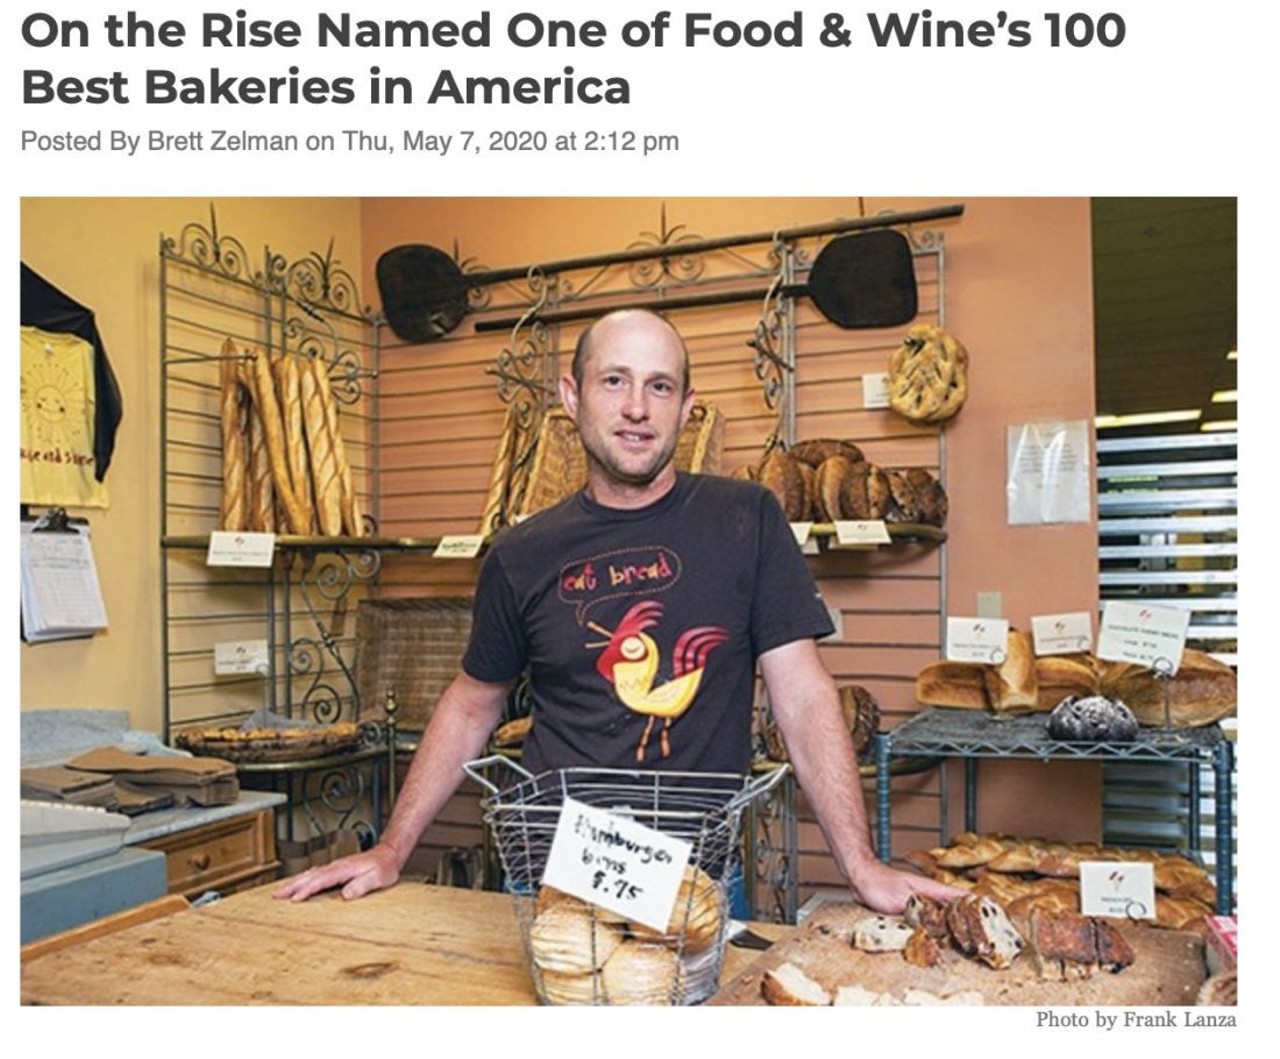  &#147;On the Rise Named One of Food & Wine&#146;s 100 Best Bakeries in America&#148;
June 25th
&#147;The write-up about the beloved Cleveland Heights bakery read, &#147;Nearly twenty years ago now, before good baguettes were a thing in a lot of other places in America you&#146;d have thought would know better, they were flying off the shelves at this Cleveland Heights essential business, and were notably favored by discerning hometown boy Michael Ruhlman. Just one of many reasons we like to spend time foraging our way through Cleveland.&#146;&#146;&#148;
Photo by Frank J. Lanza